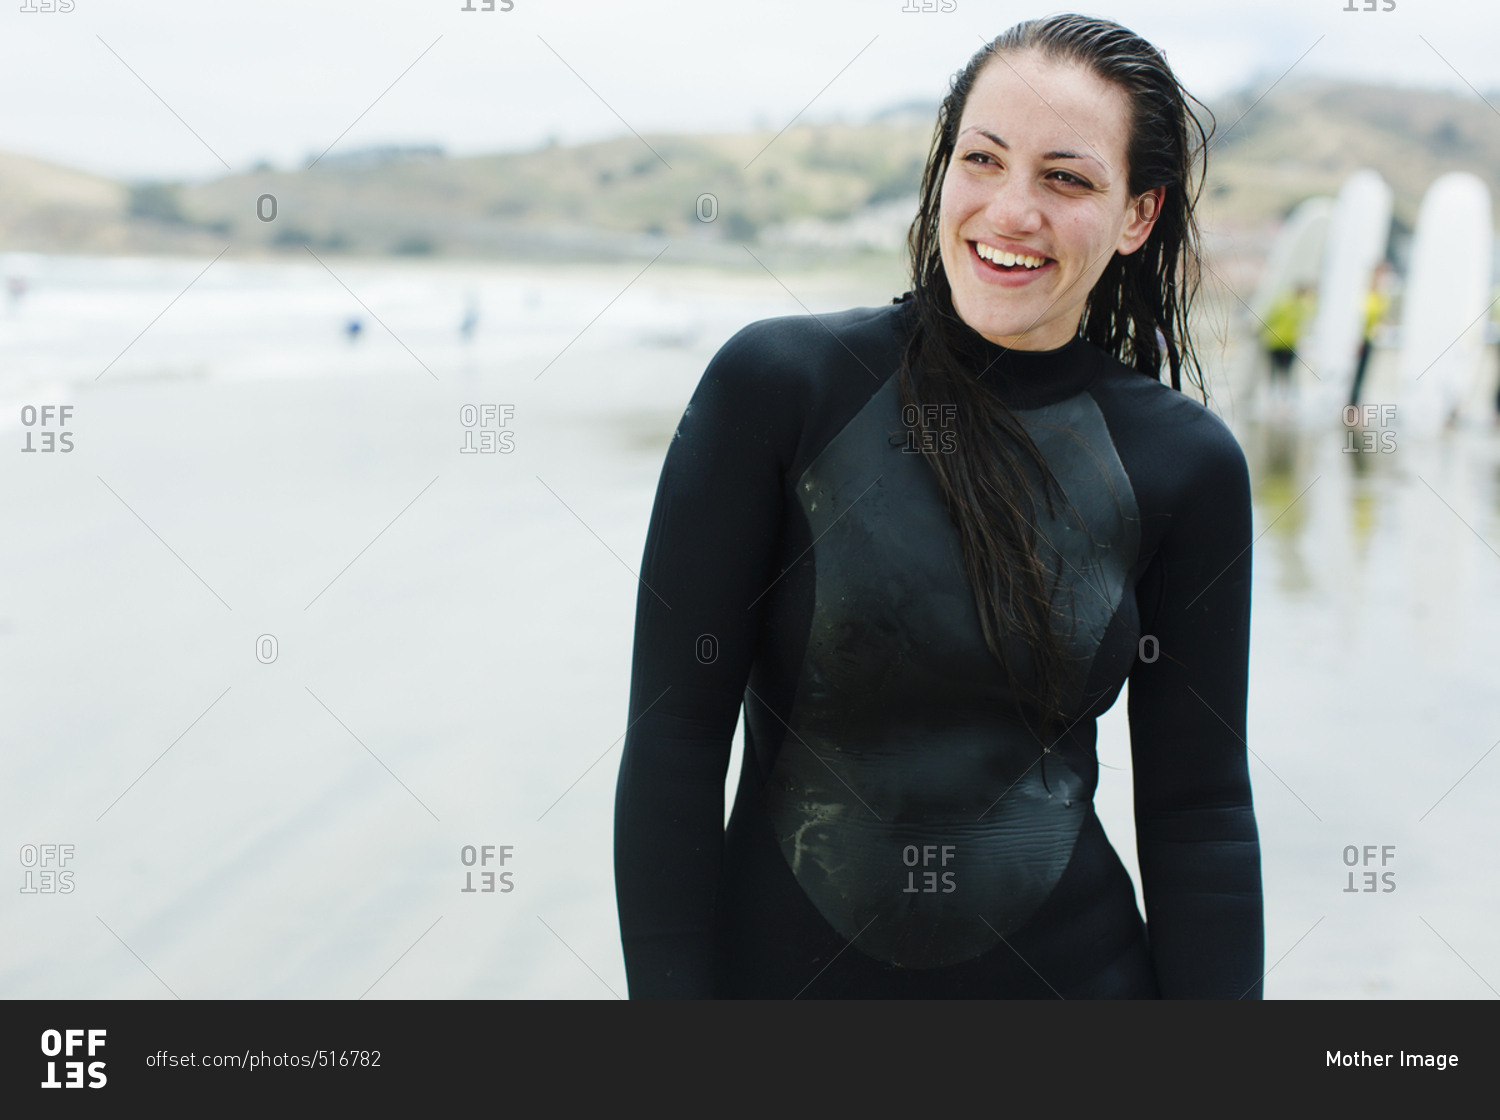 Female laughs at surf lesson in San Francisco, California